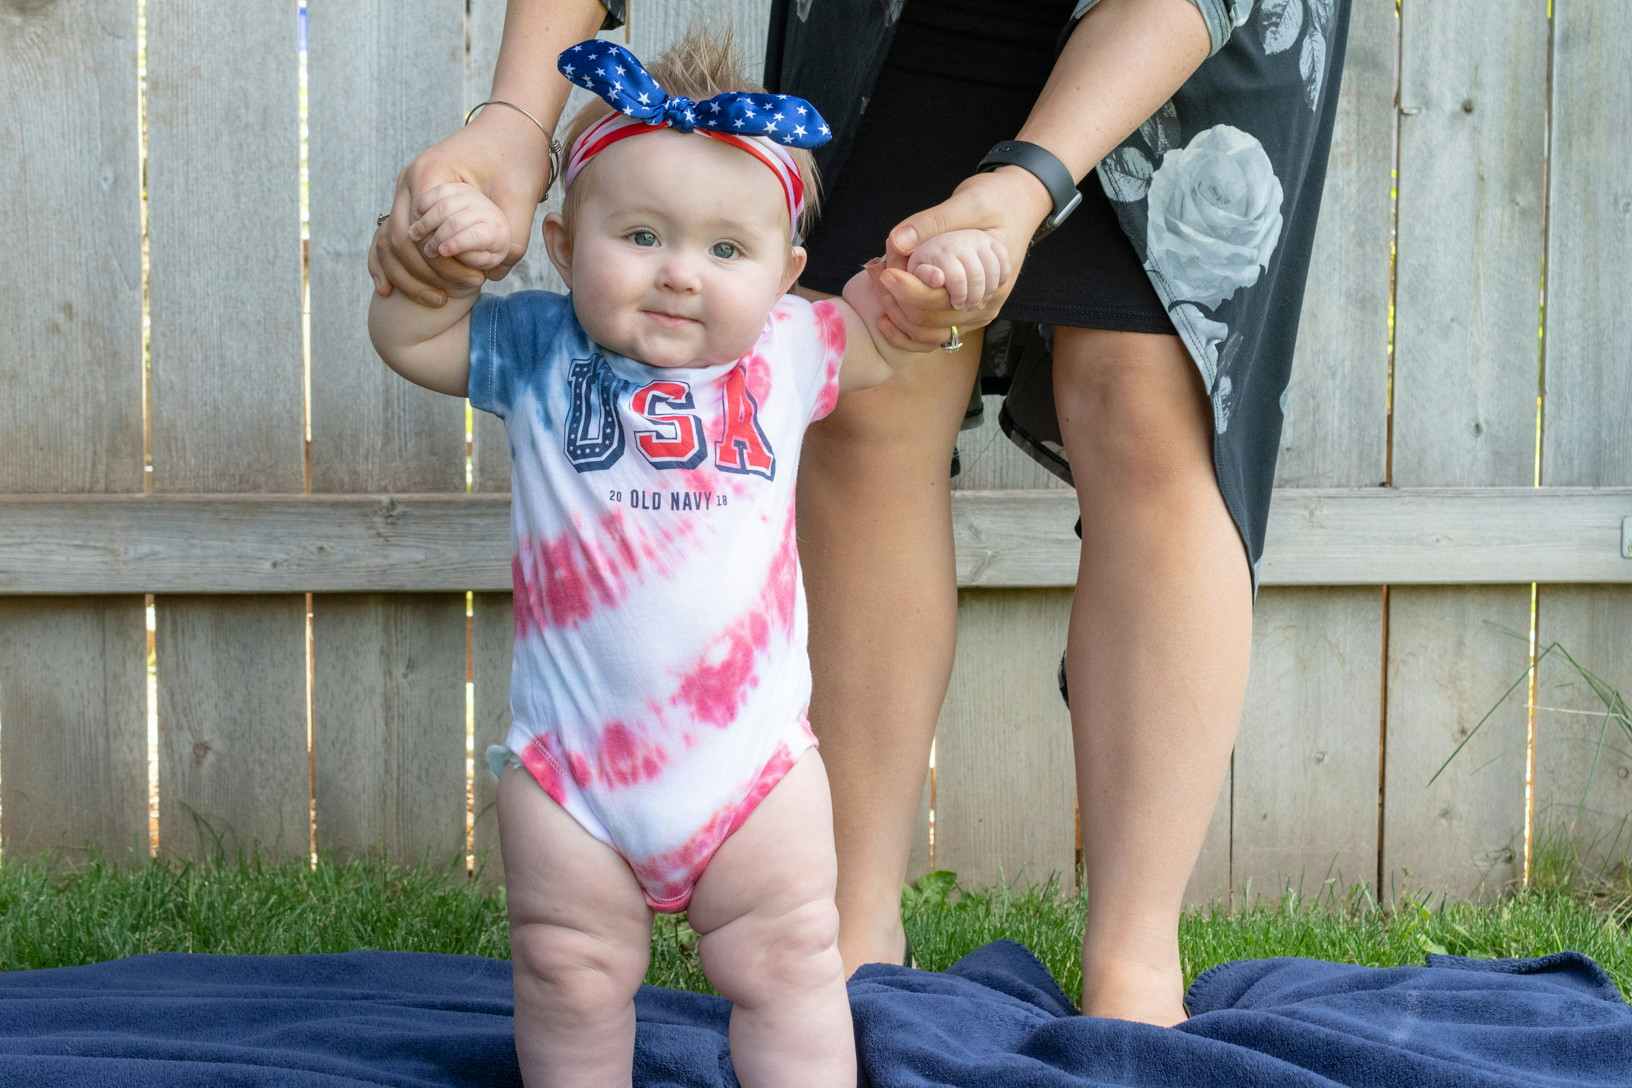 A mother helping her baby stand up to show off the tie dye USA onsie and American flag bandana the baby is wearing.